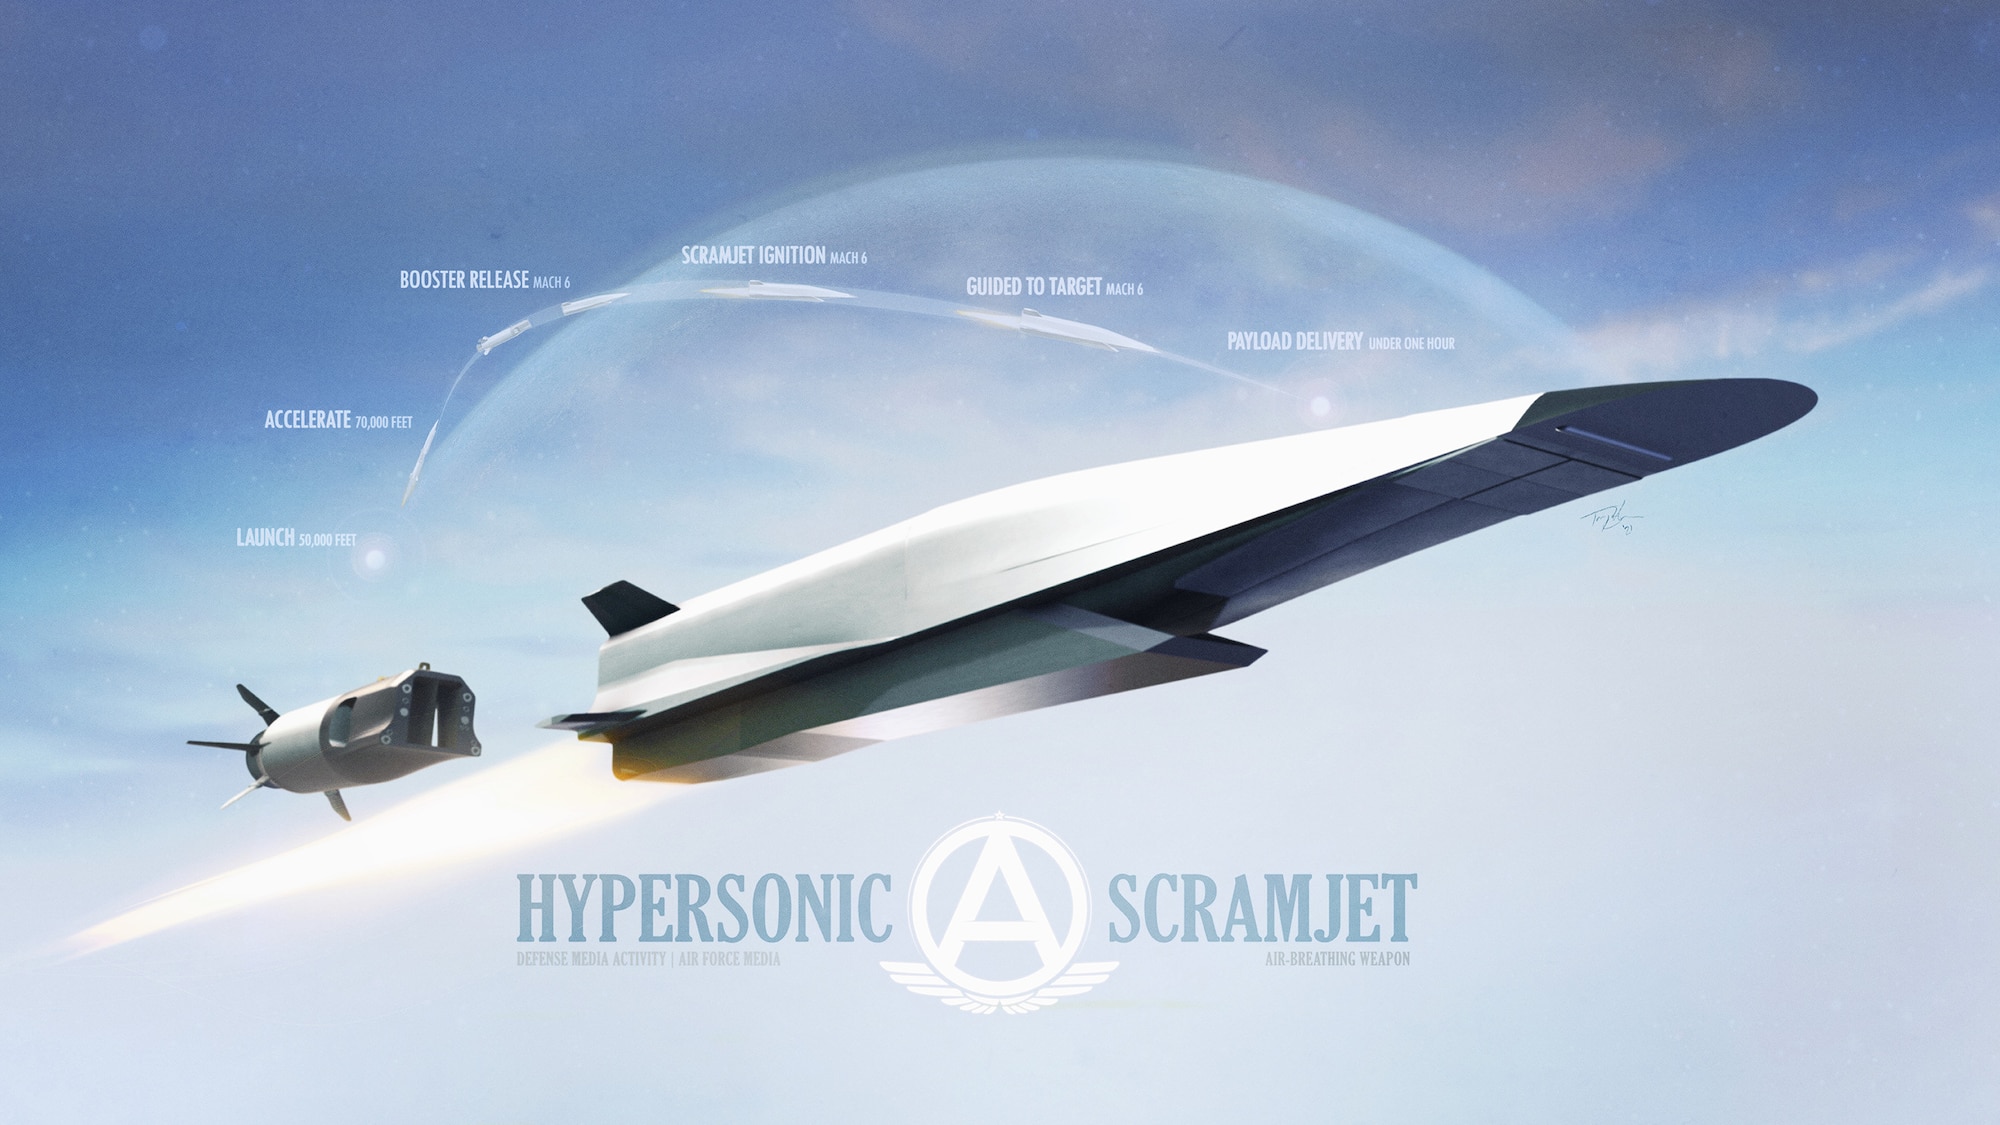 Illustration depicting Hypersonic weapons